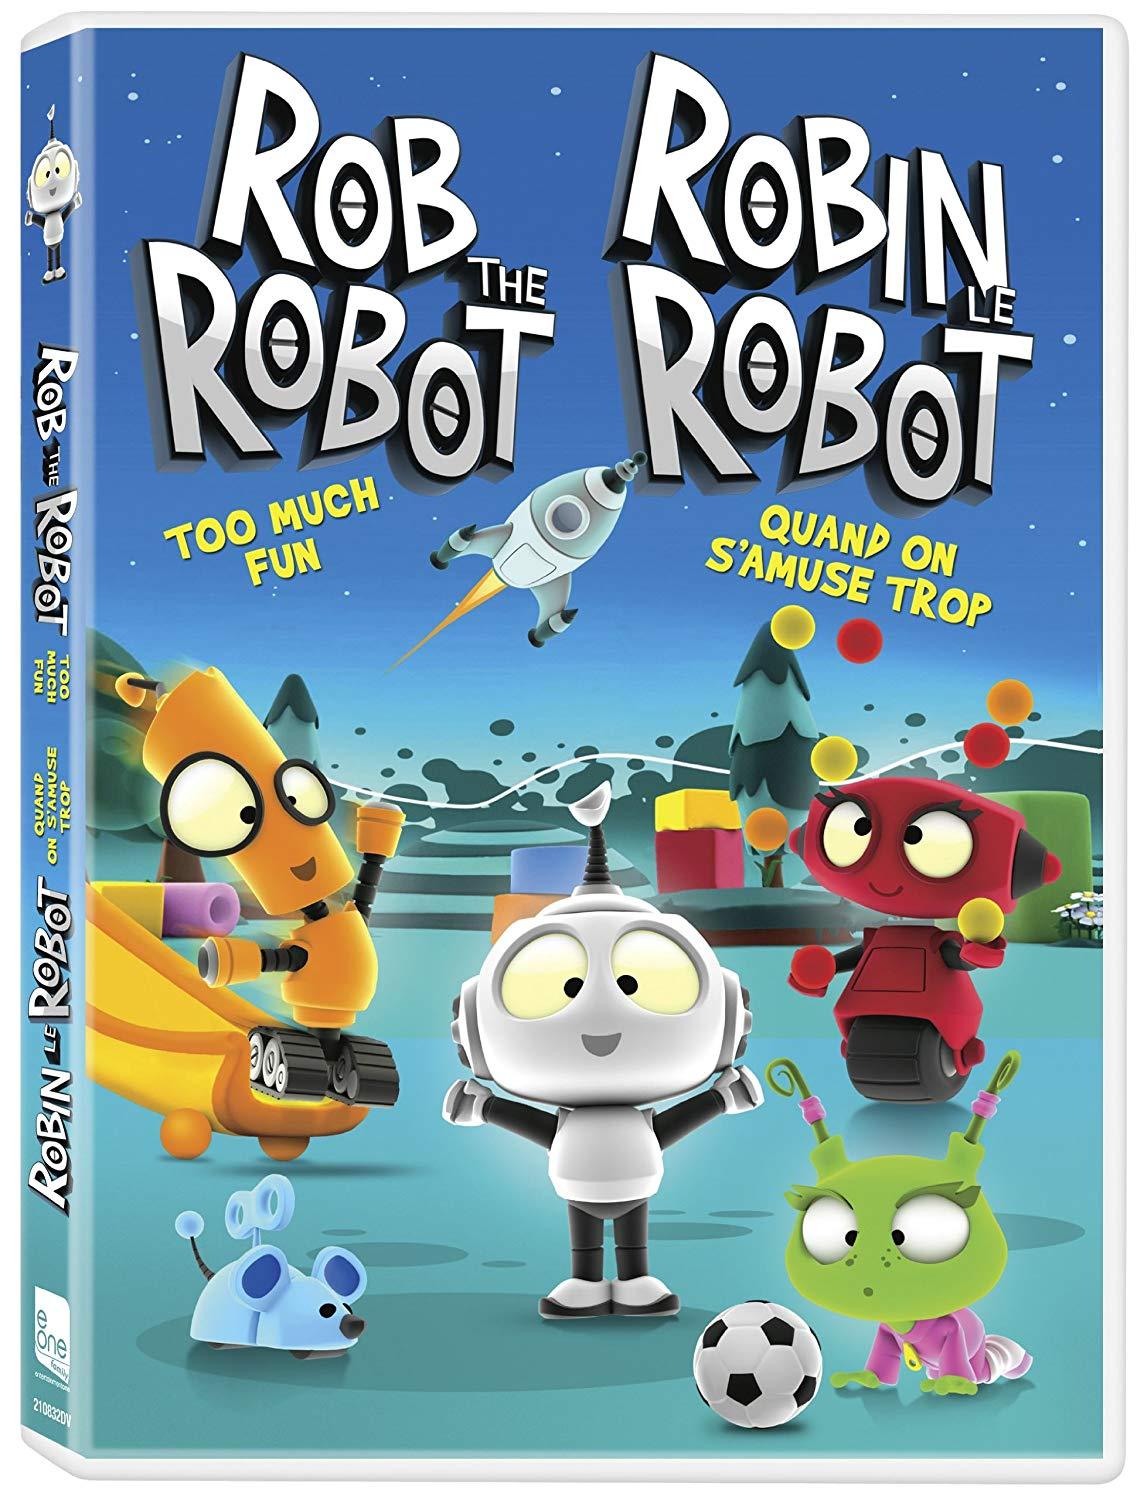 Rob the Robot Logo - Rob The Robot: Too Much Fun / Robin le robot: Quand on s'amuse trop ...